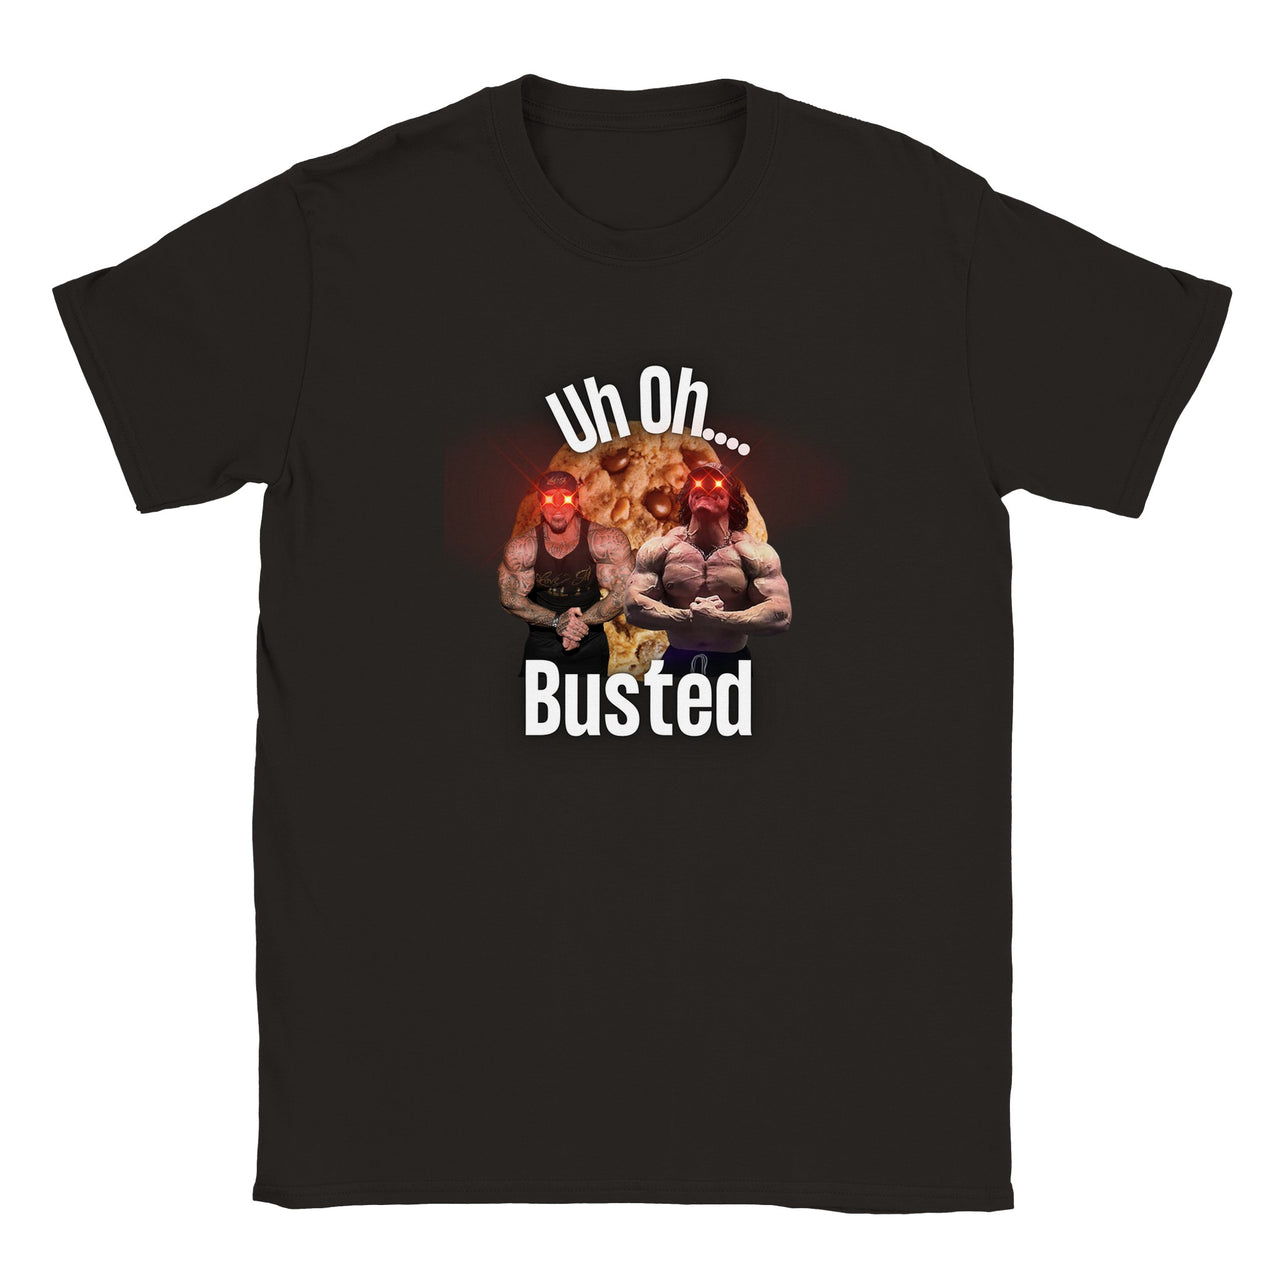 Uh Oh... Busted T-shirt